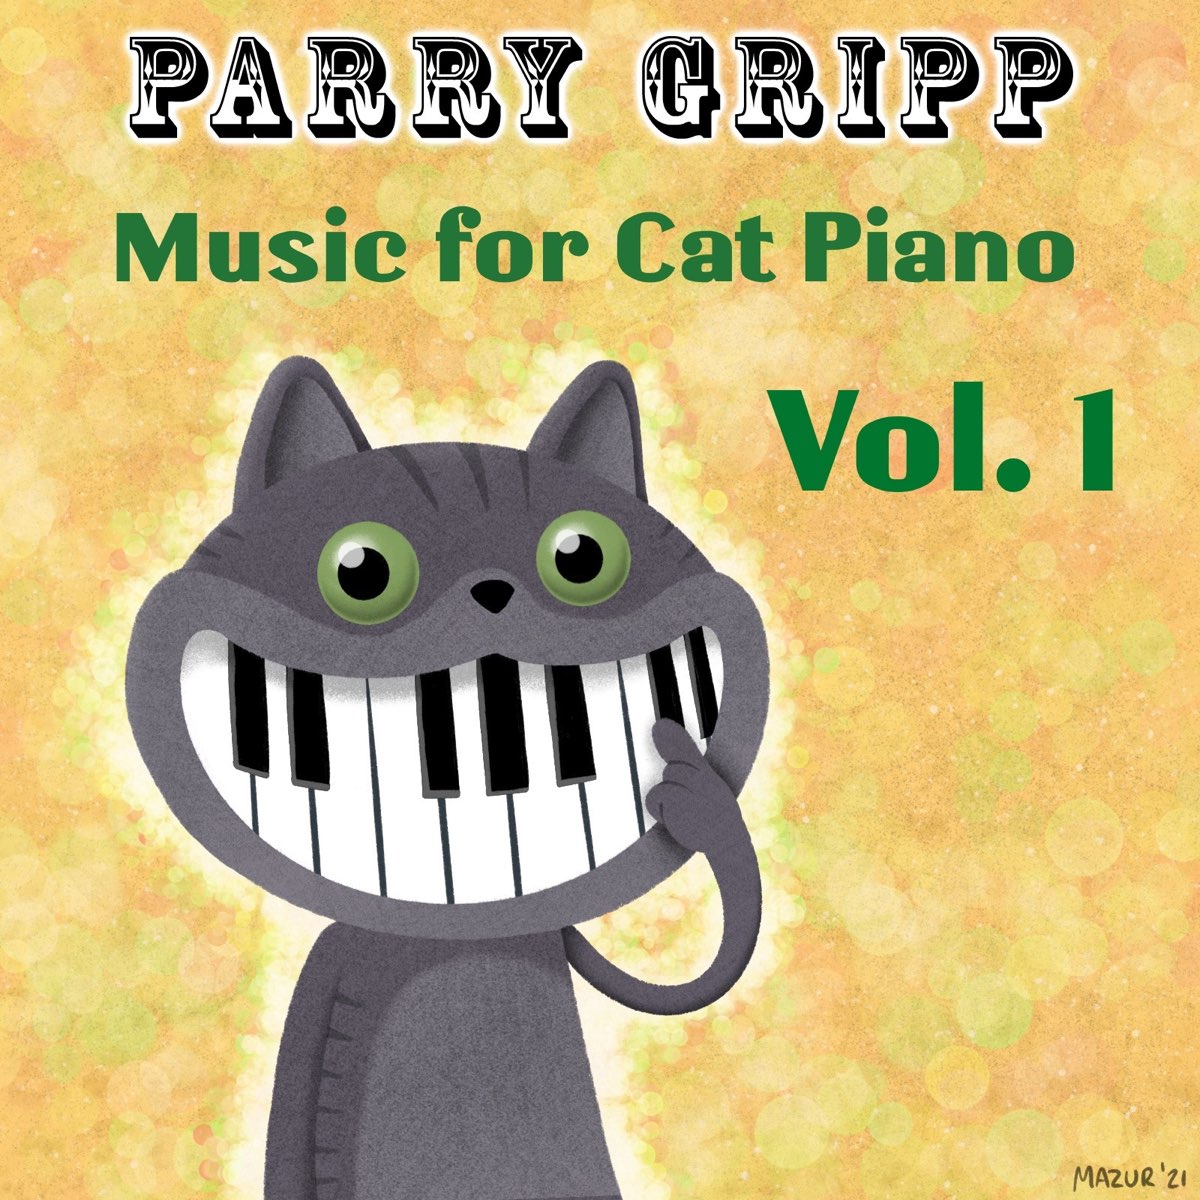 Music for Cat Piano, Volume 1 - Single - Album by Parry Gripp - Apple Music